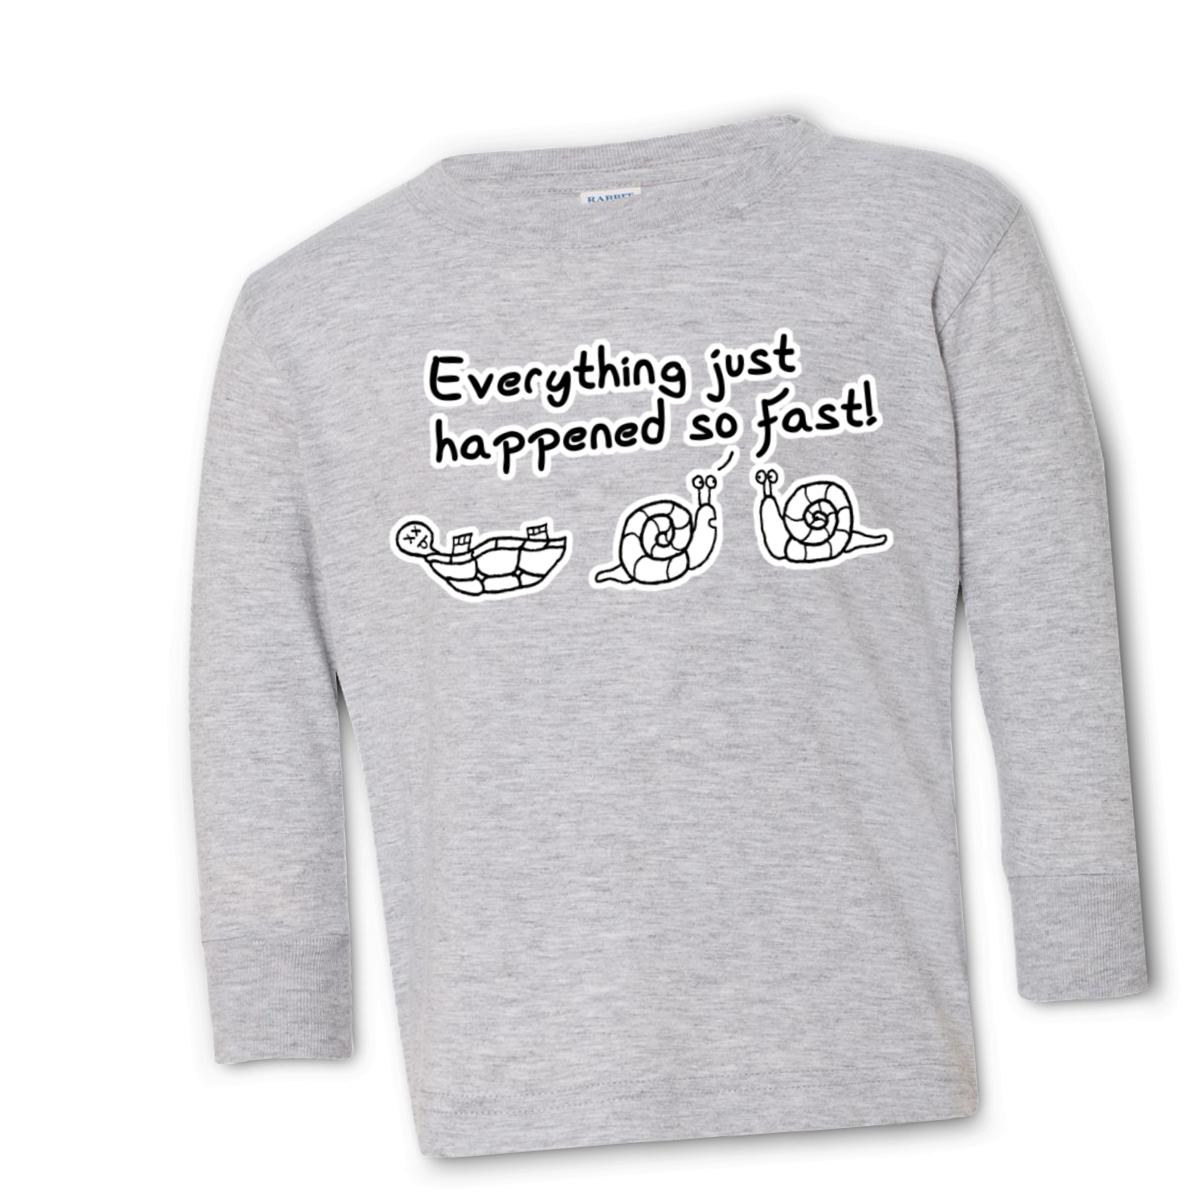 Happened So Fast Toddler Long Sleeve Tee 56T heather